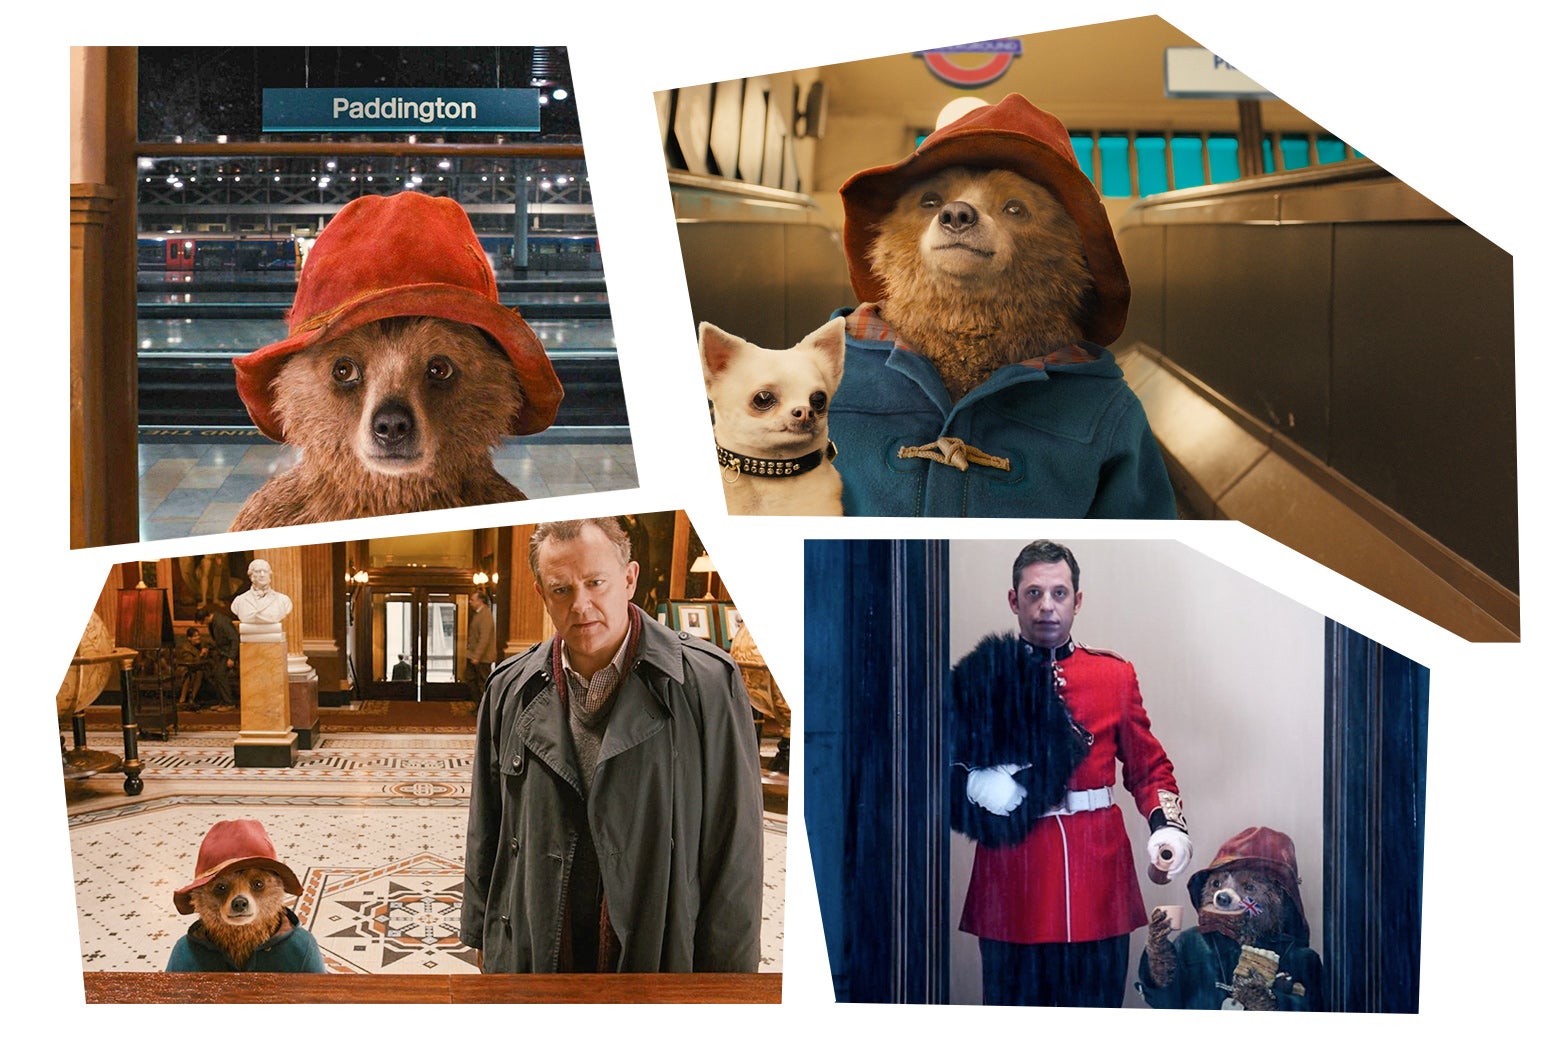 A collage in the usual style, except in place of four stills from four different movies, it just shows four stills from Paddington.